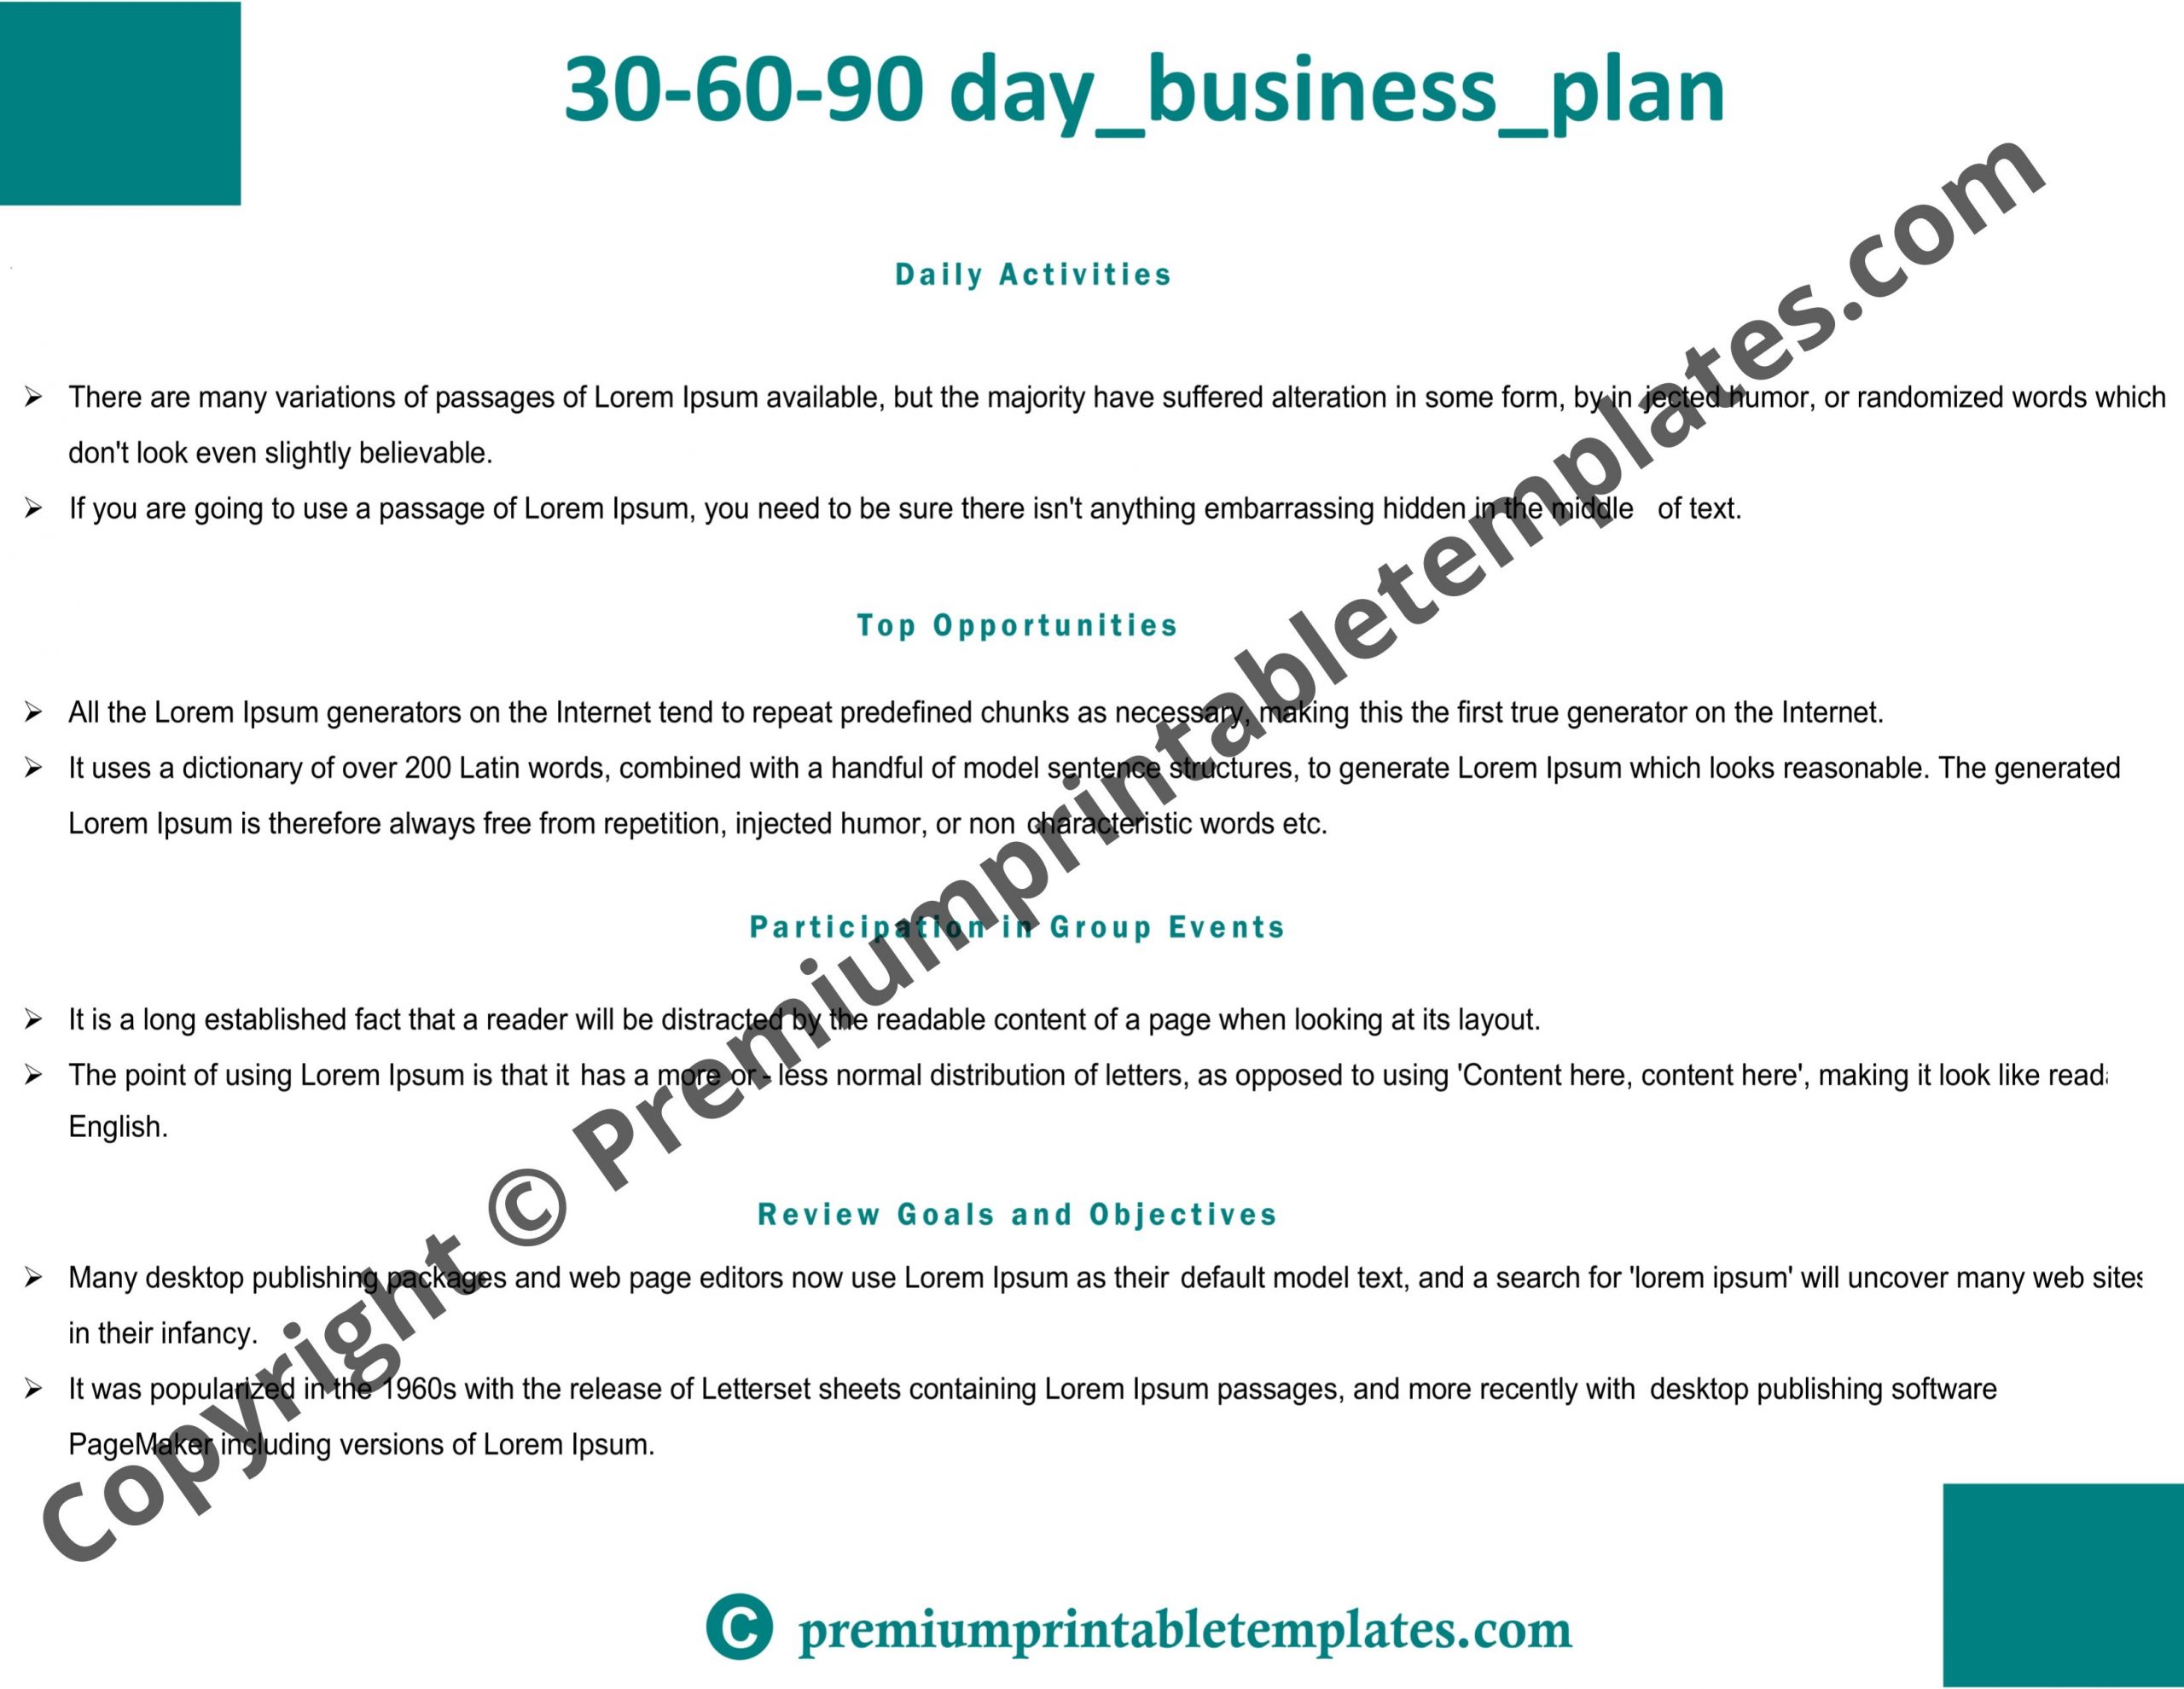 90 Day Review Template from premiumprintabletemplates.com